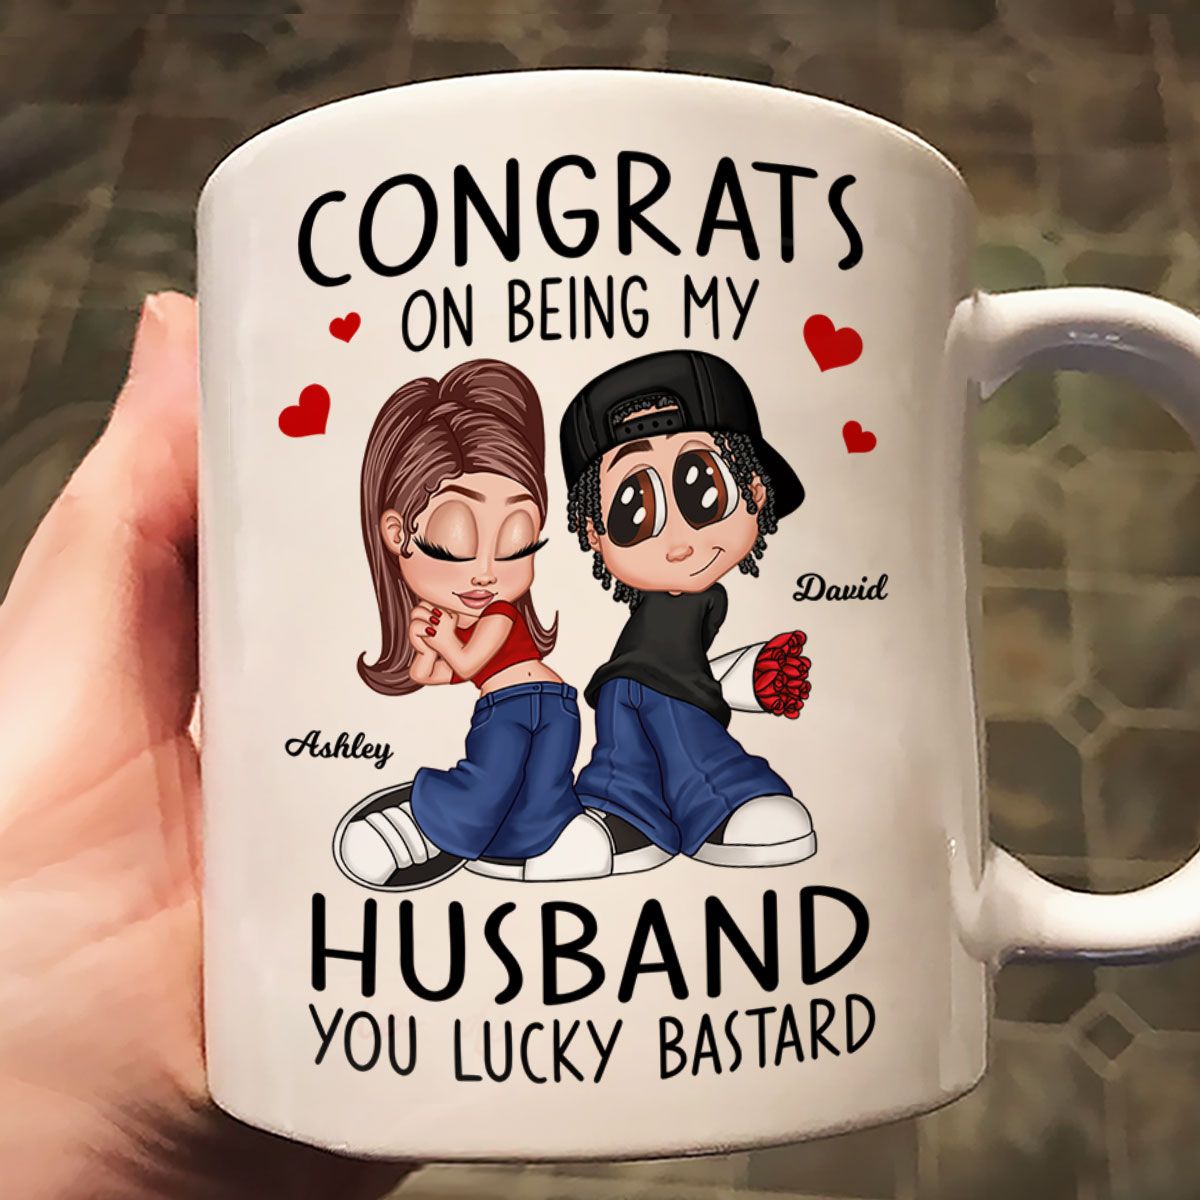 Congrats On Being My Husband You Lucky Bastard, Funny Personalized Mug, Gift For Him